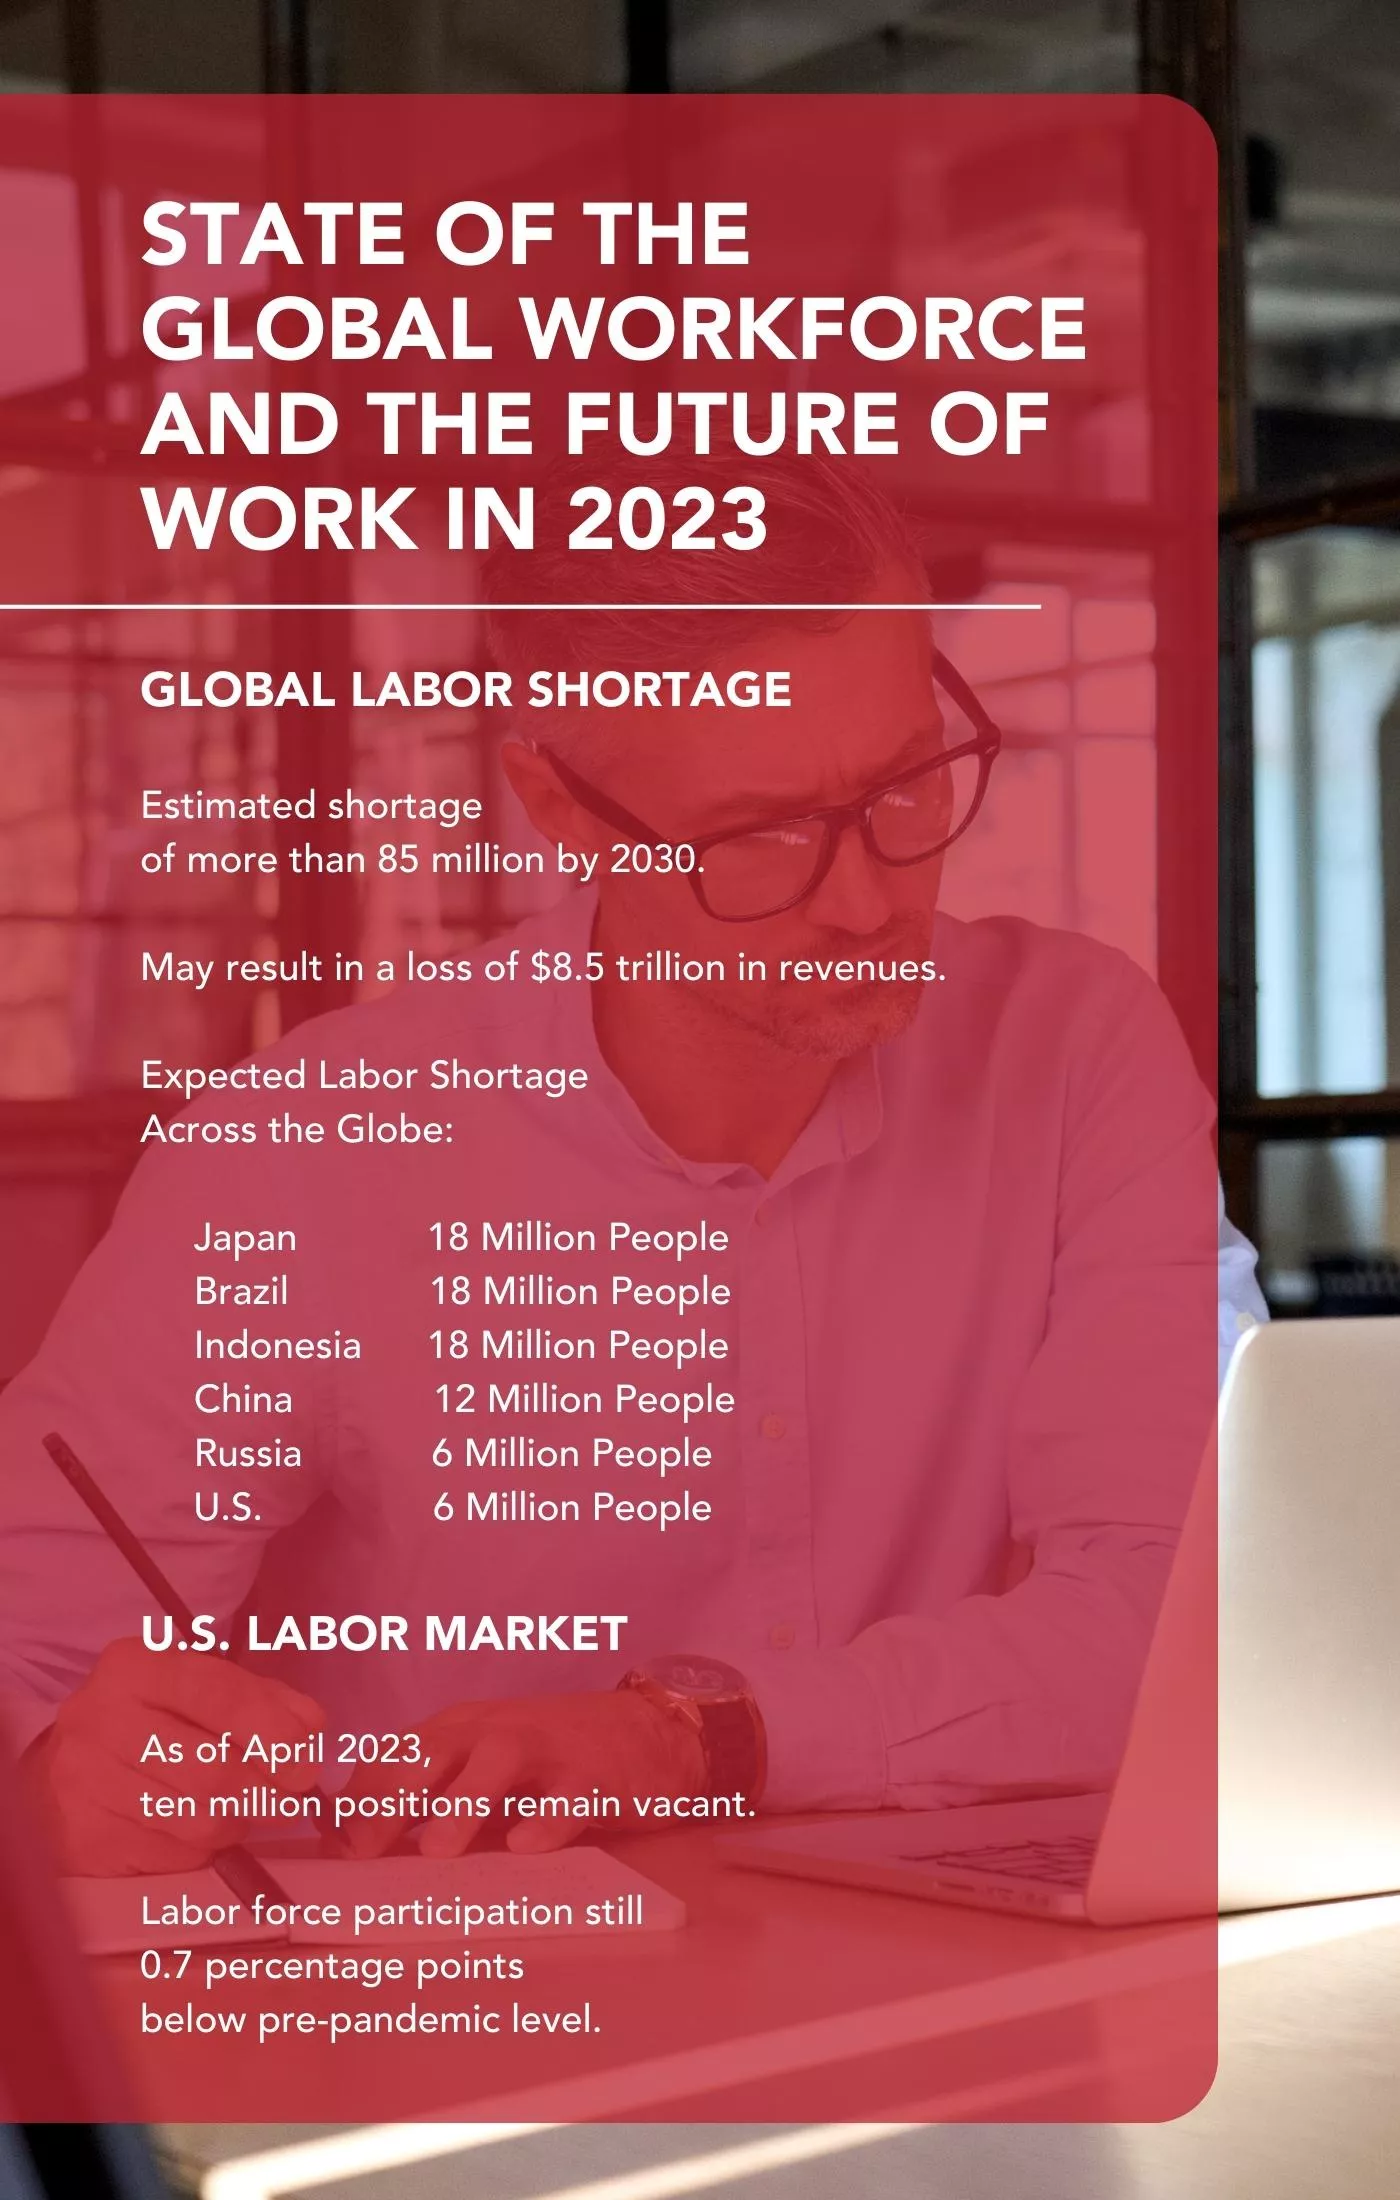 An infographic shows statistics on global labor shortage that give rise to HR Outsourcing trends.